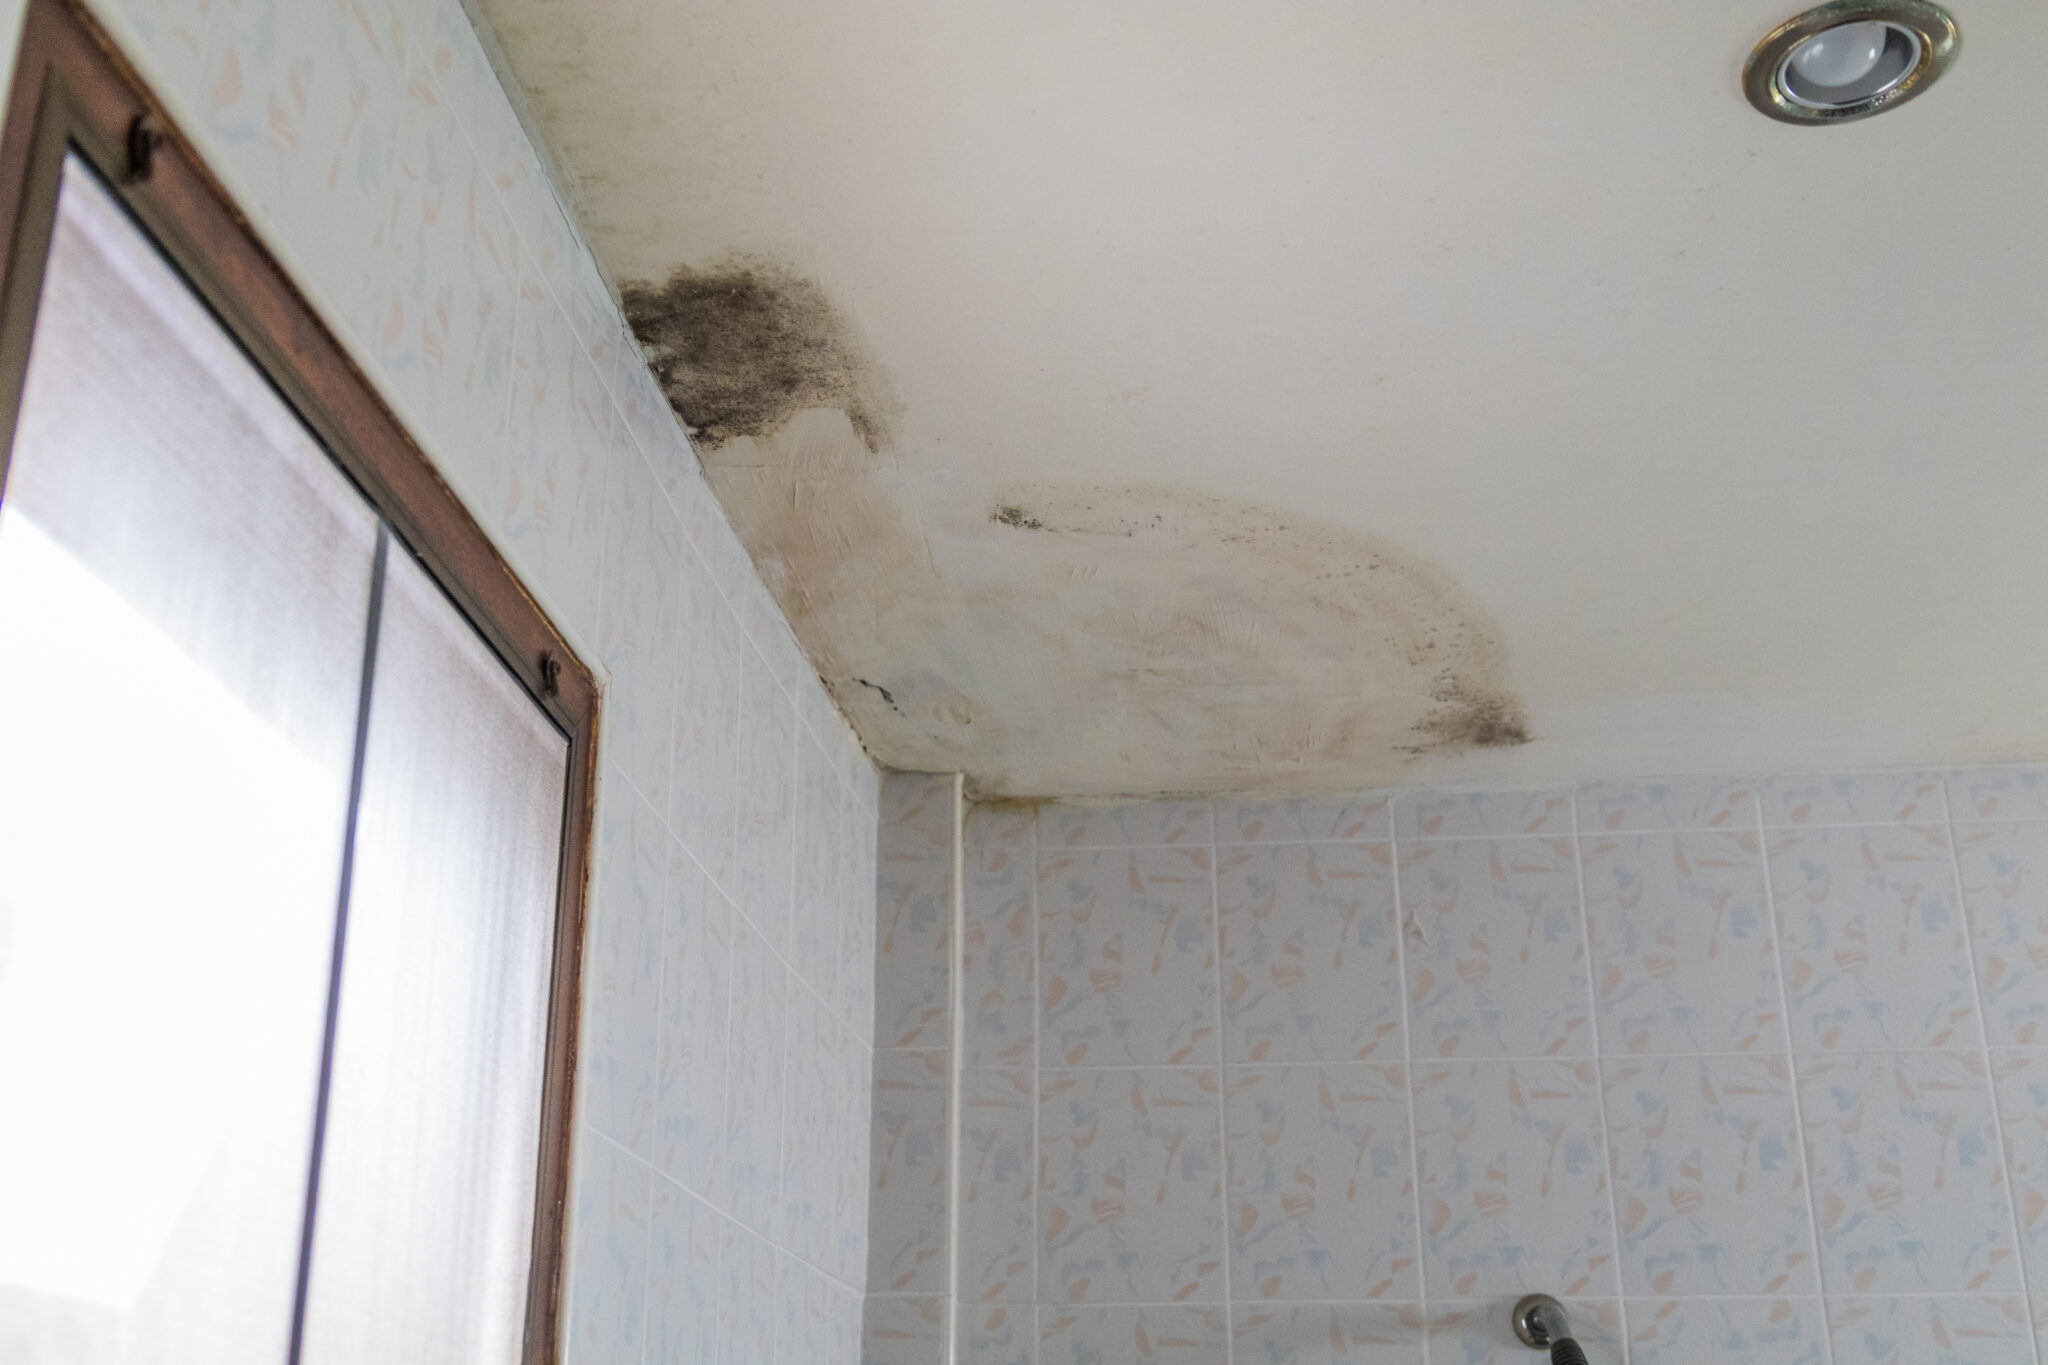 How To Get Rid Of Mold From The Bathroom Ceiling